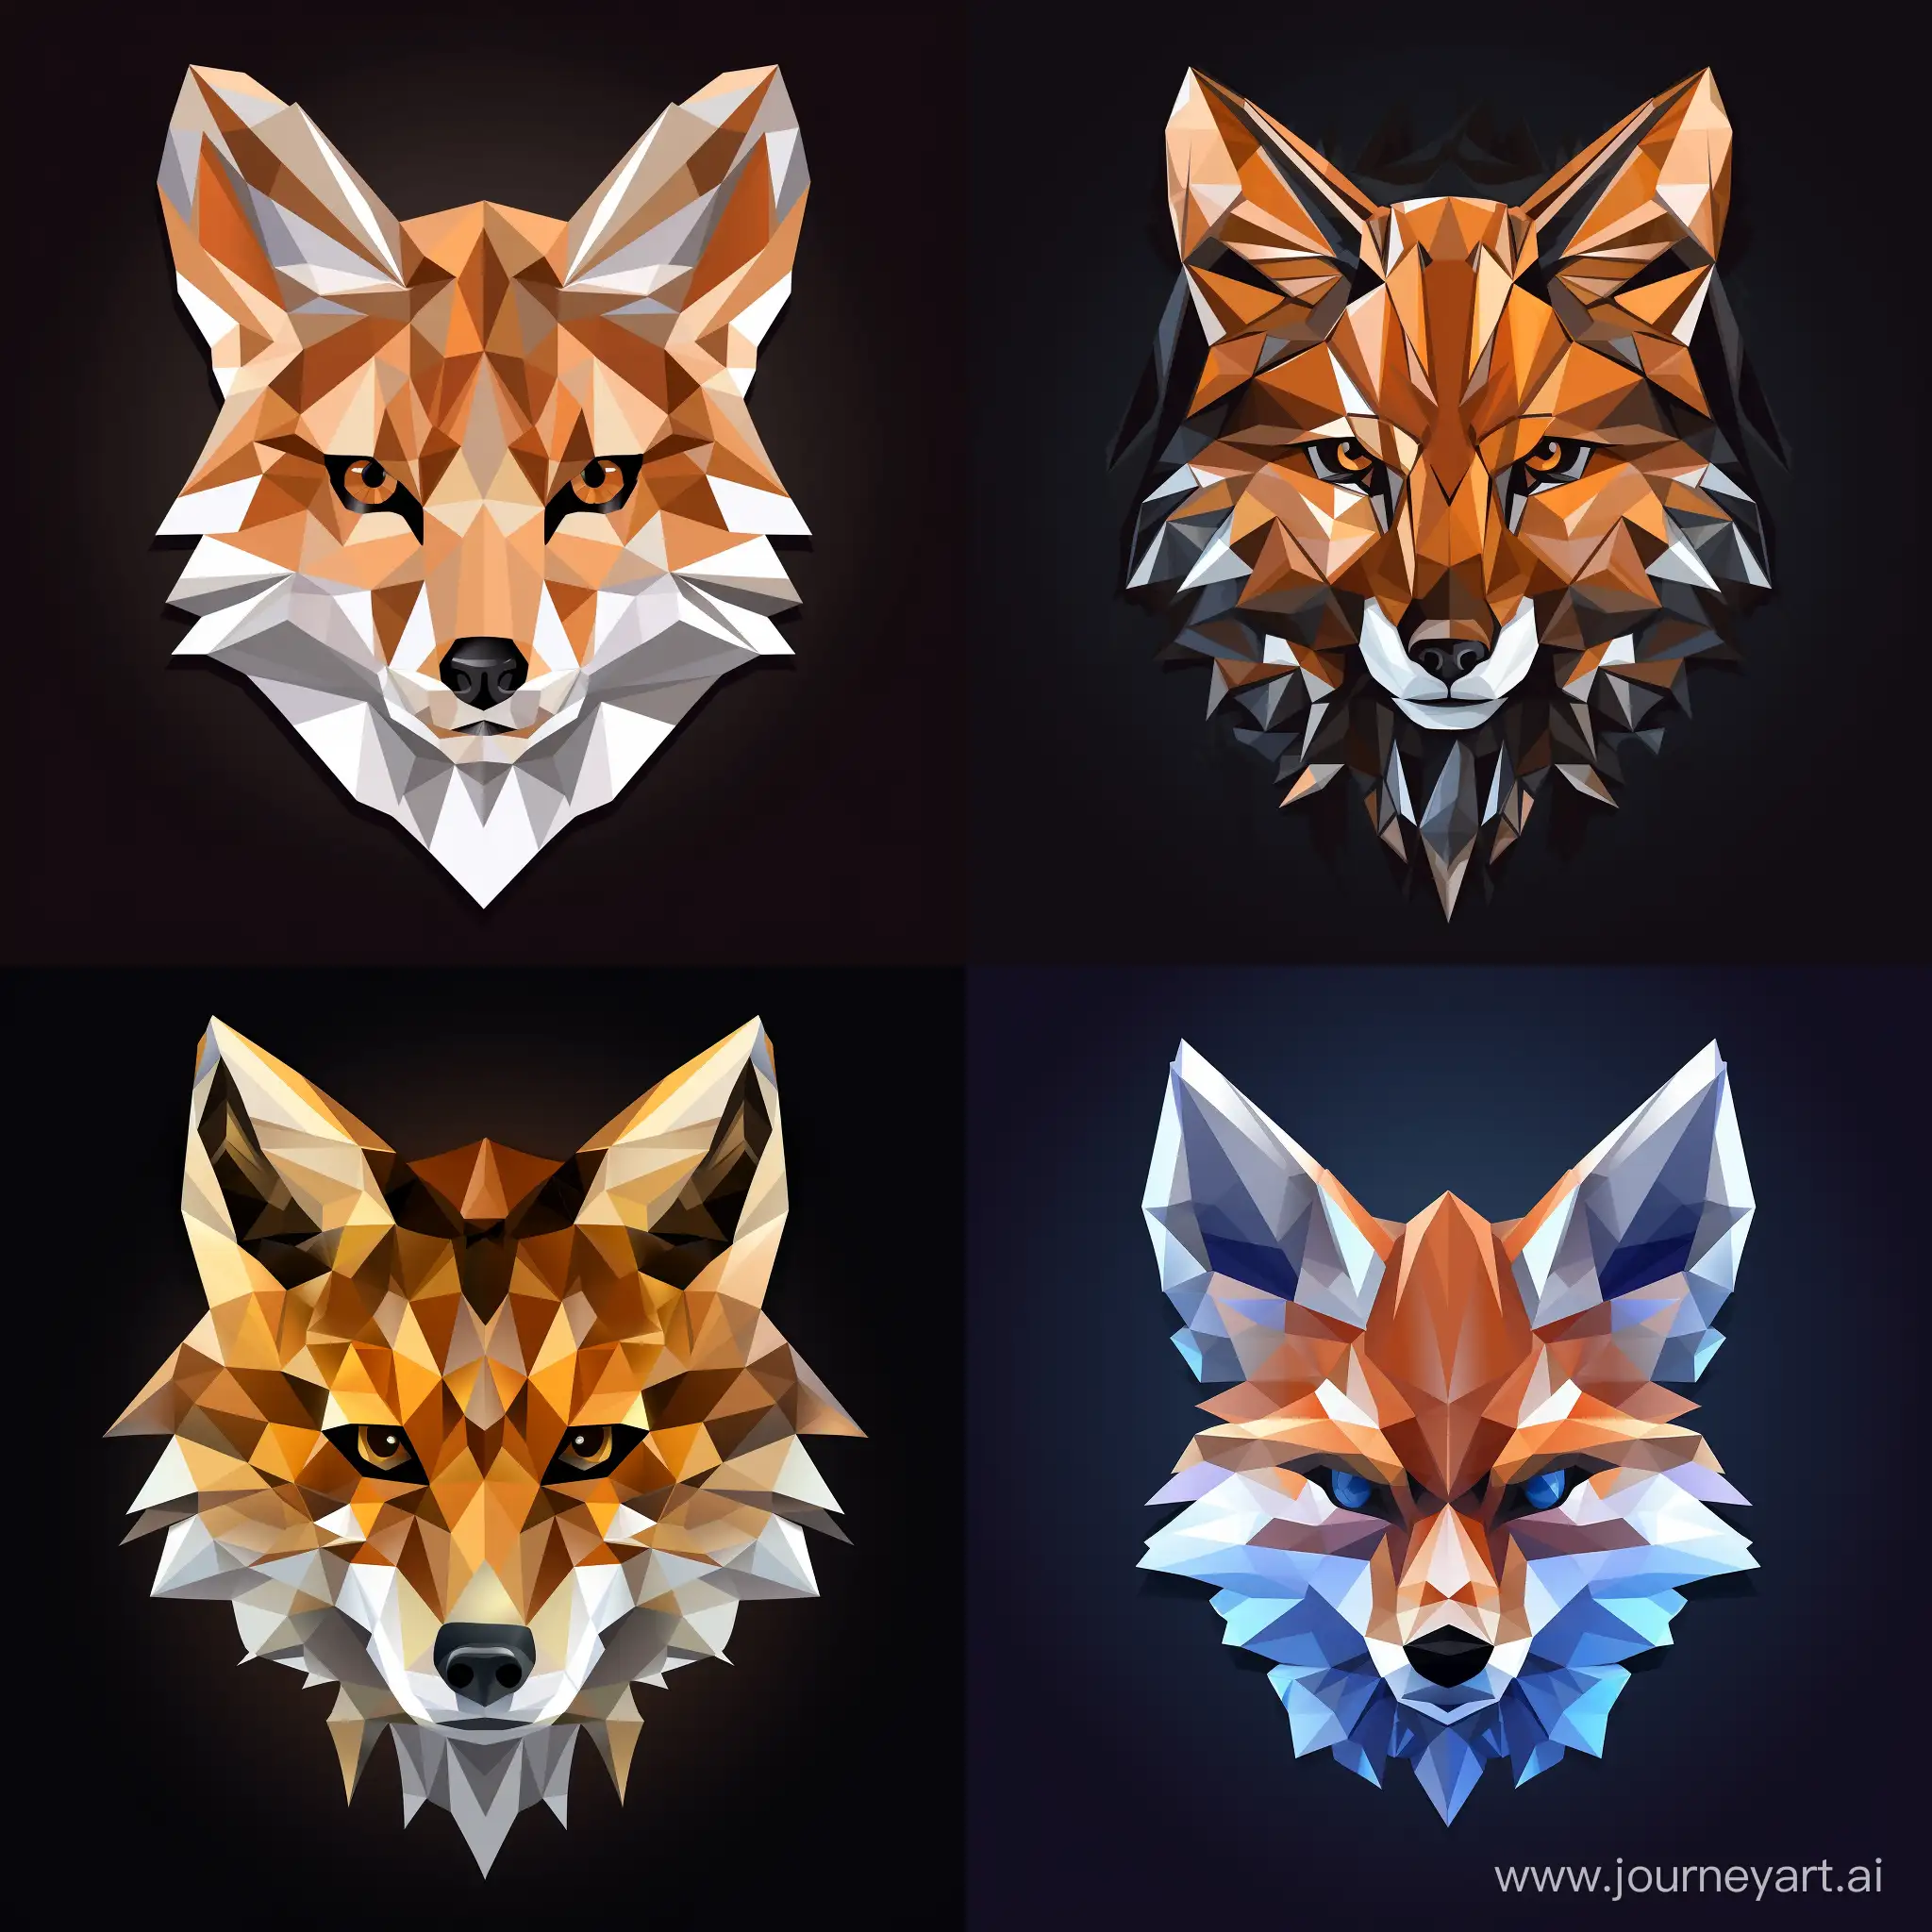  fox face, origami no background, no black background, no arguments. Simplify and more visible eyes, in vector style